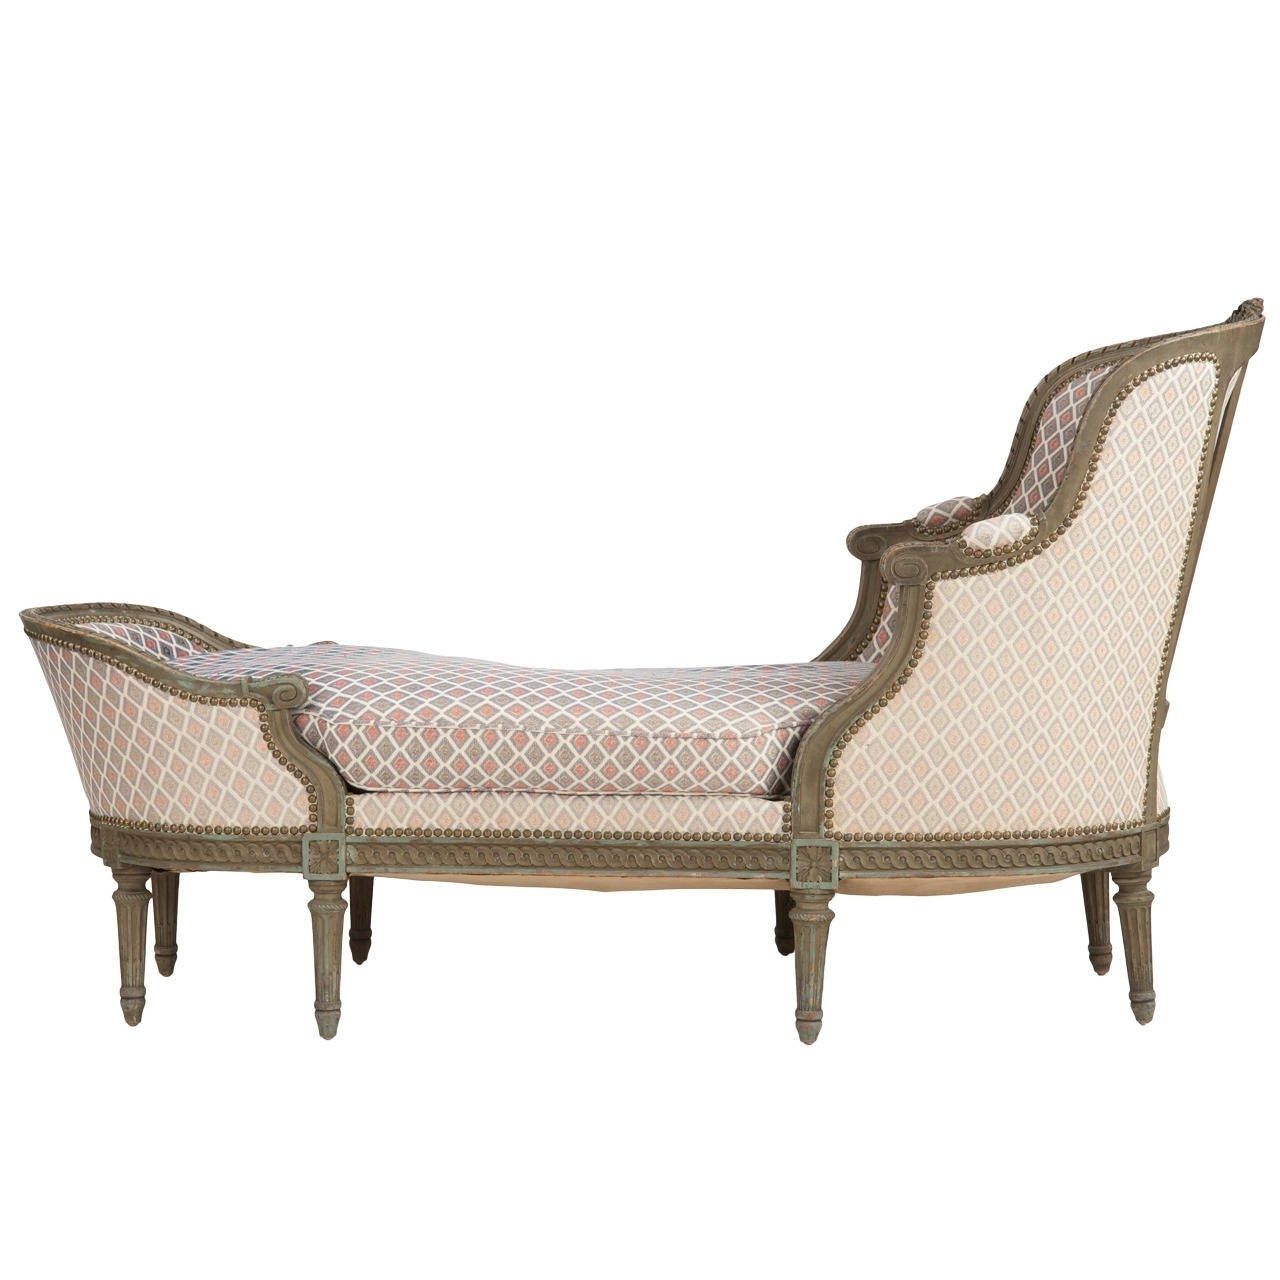 Trendy French Louis Xvi Style Painted Antique Chaise Lounge Longue Settee Inside Antique Chaises (View 5 of 15)